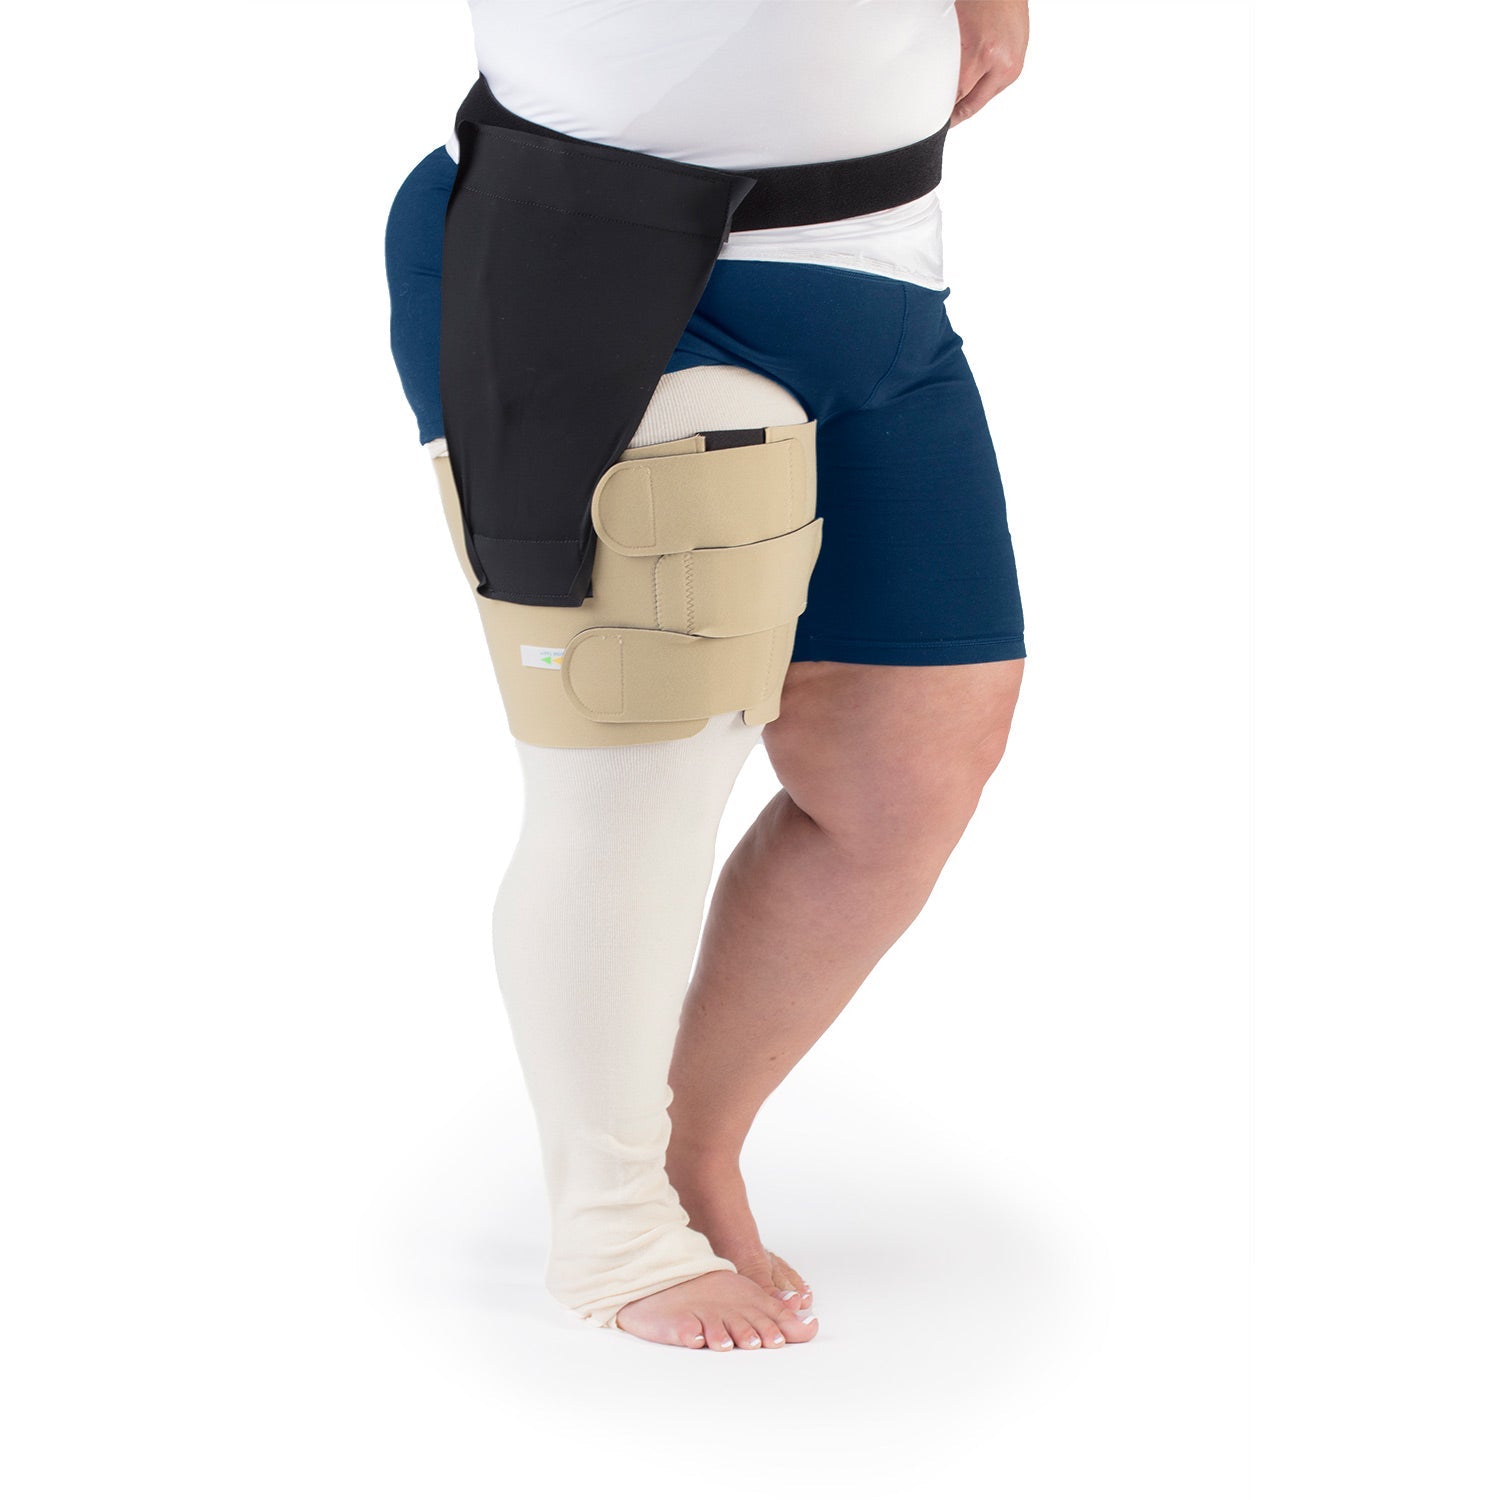 Sigvaris Chipsleeve Full Leg – Compression Store